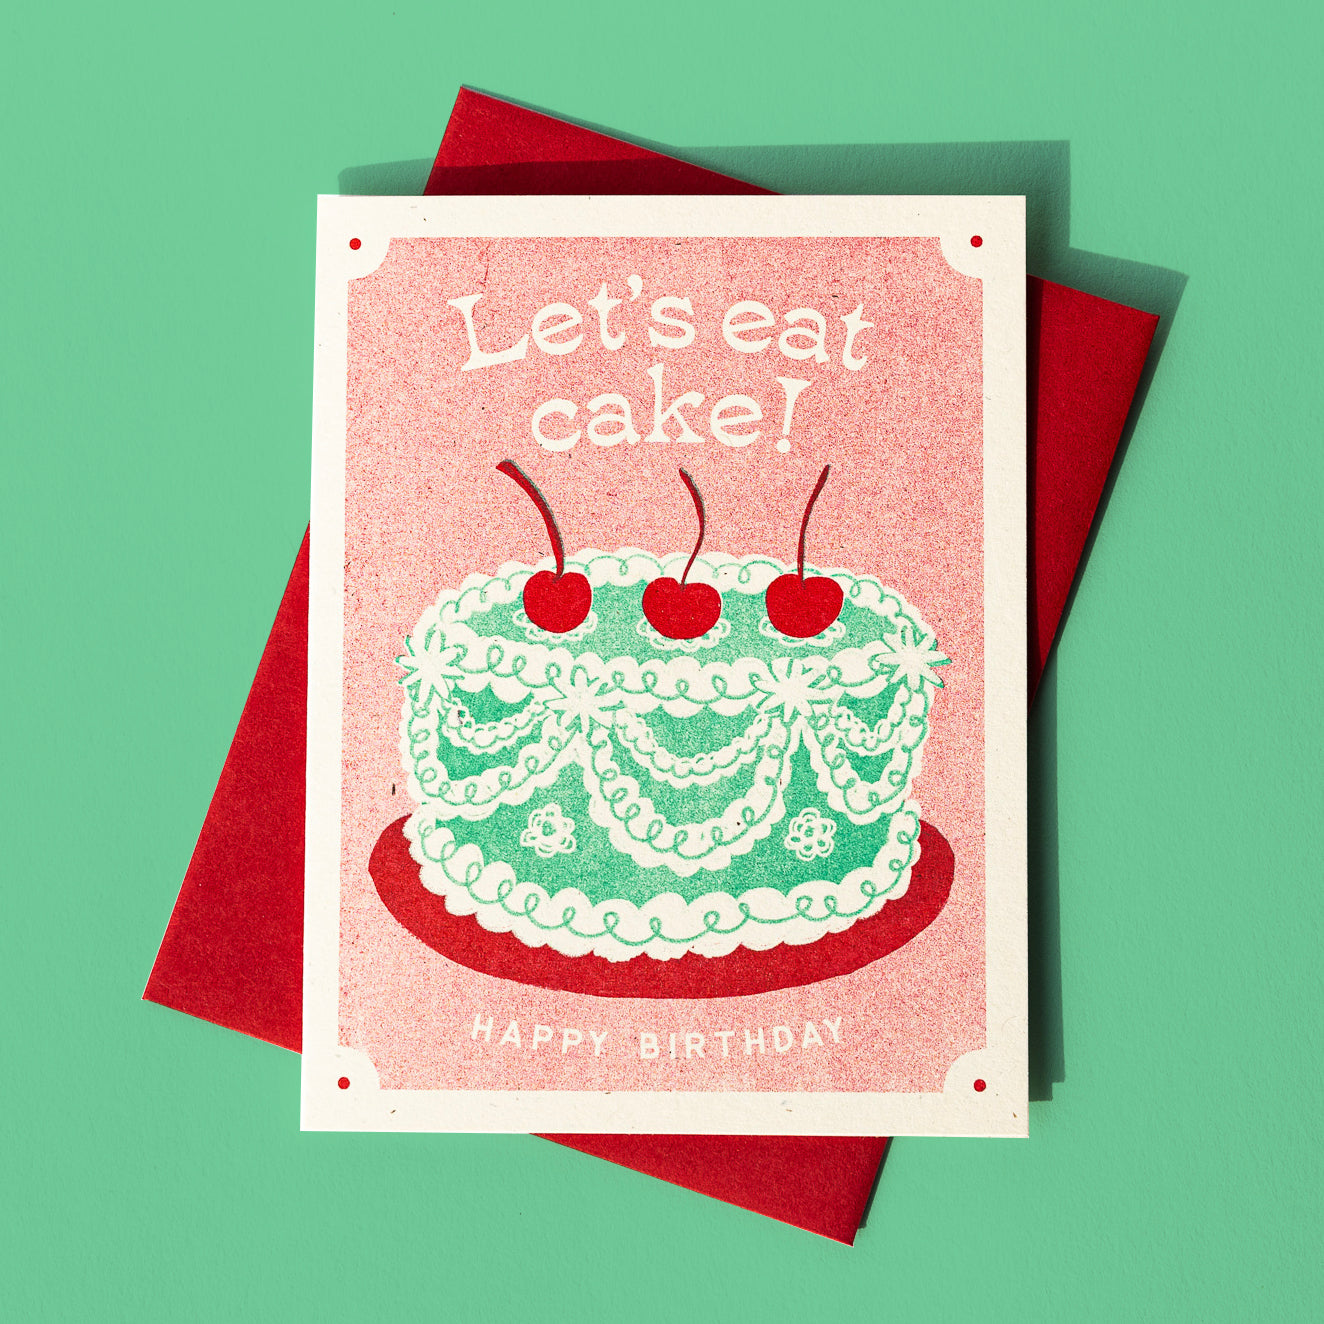 Let's Eat Cake - Risograph Birthday Card